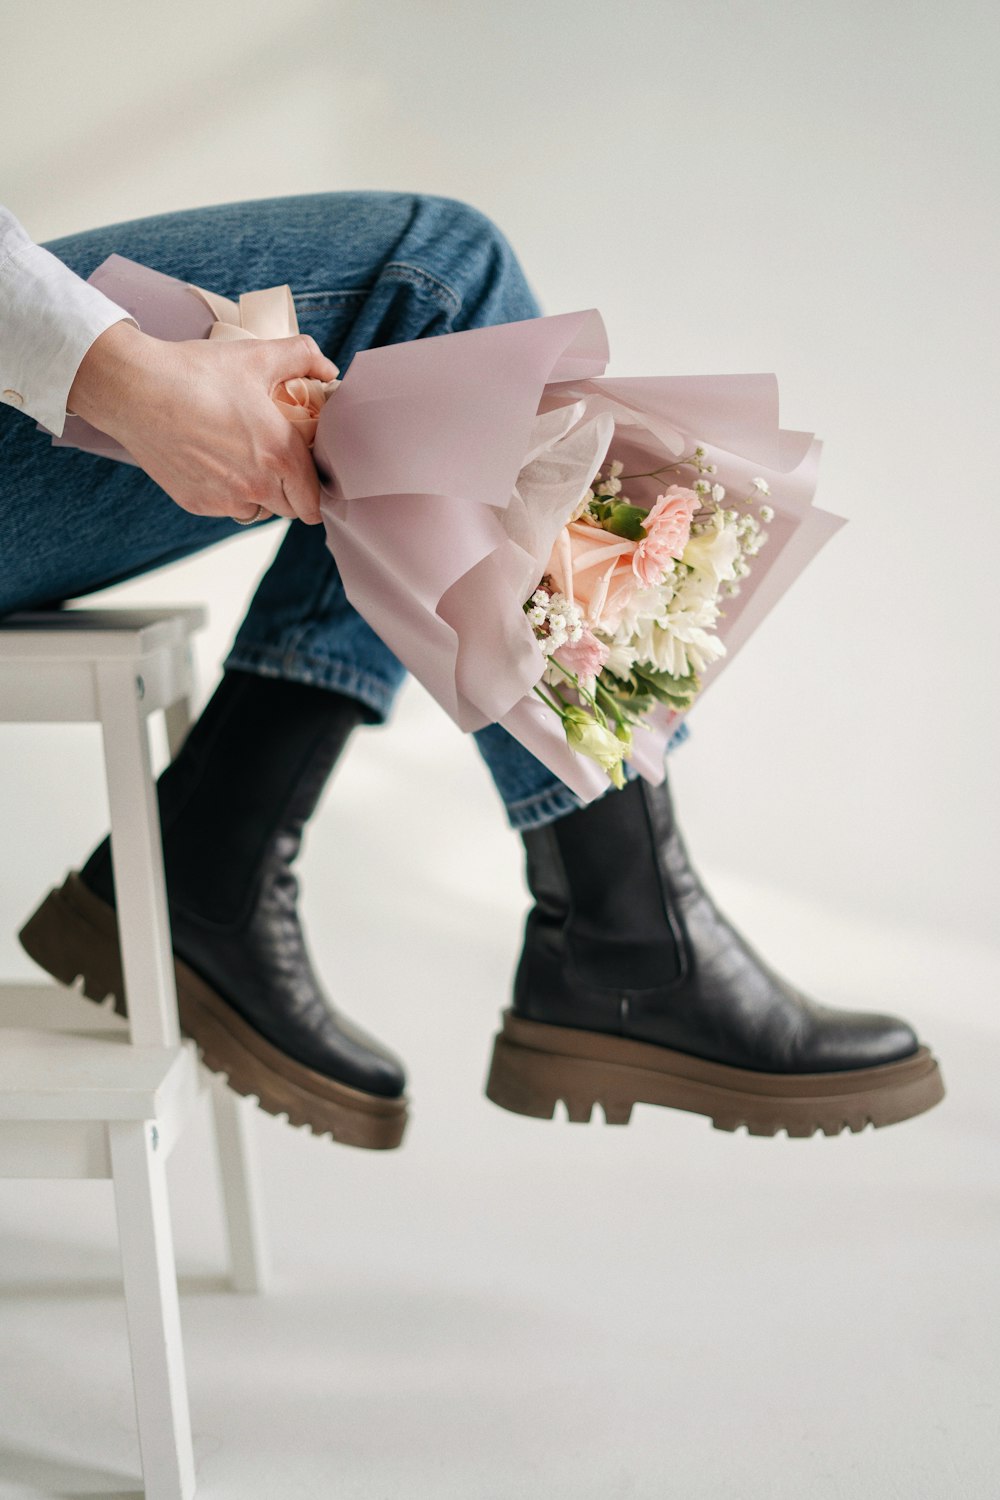 a person sitting on a stool holding a bouquet of flowers